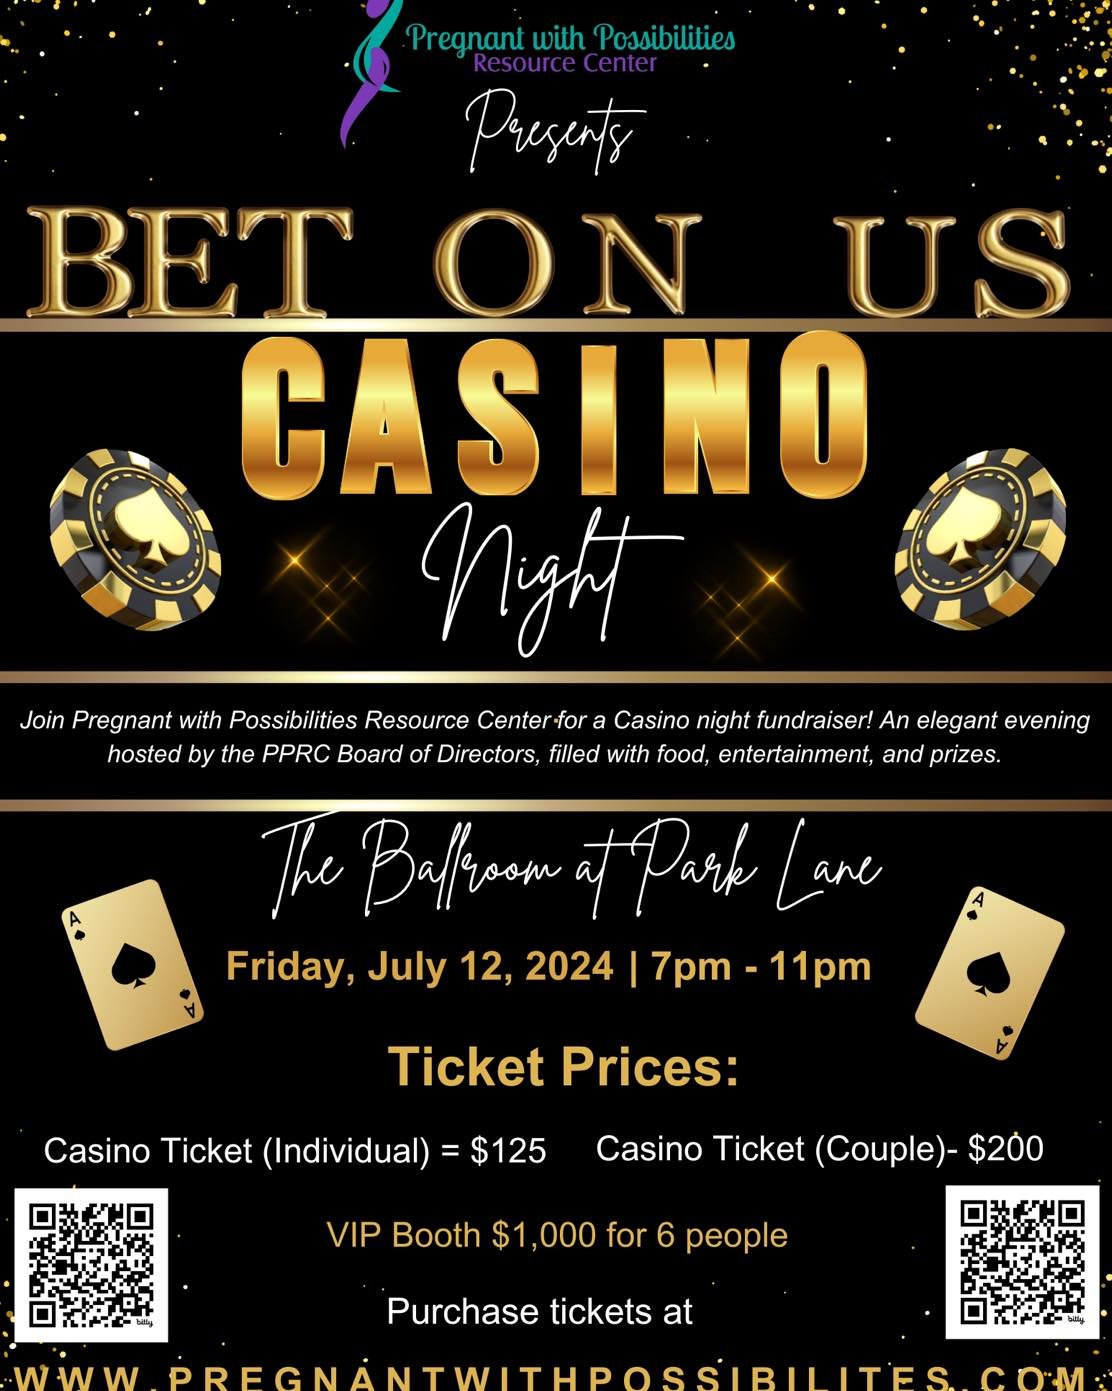 Dive into an evening of elegance and thrills at the Bet On Us Casino Night, presented by Pregnant with Possibilities Resource Center Board of Directors! 💜✨

Prepare for the excitement of &quot;Vegas Nights&quot; as The Ballroom at Park Lane undergoe